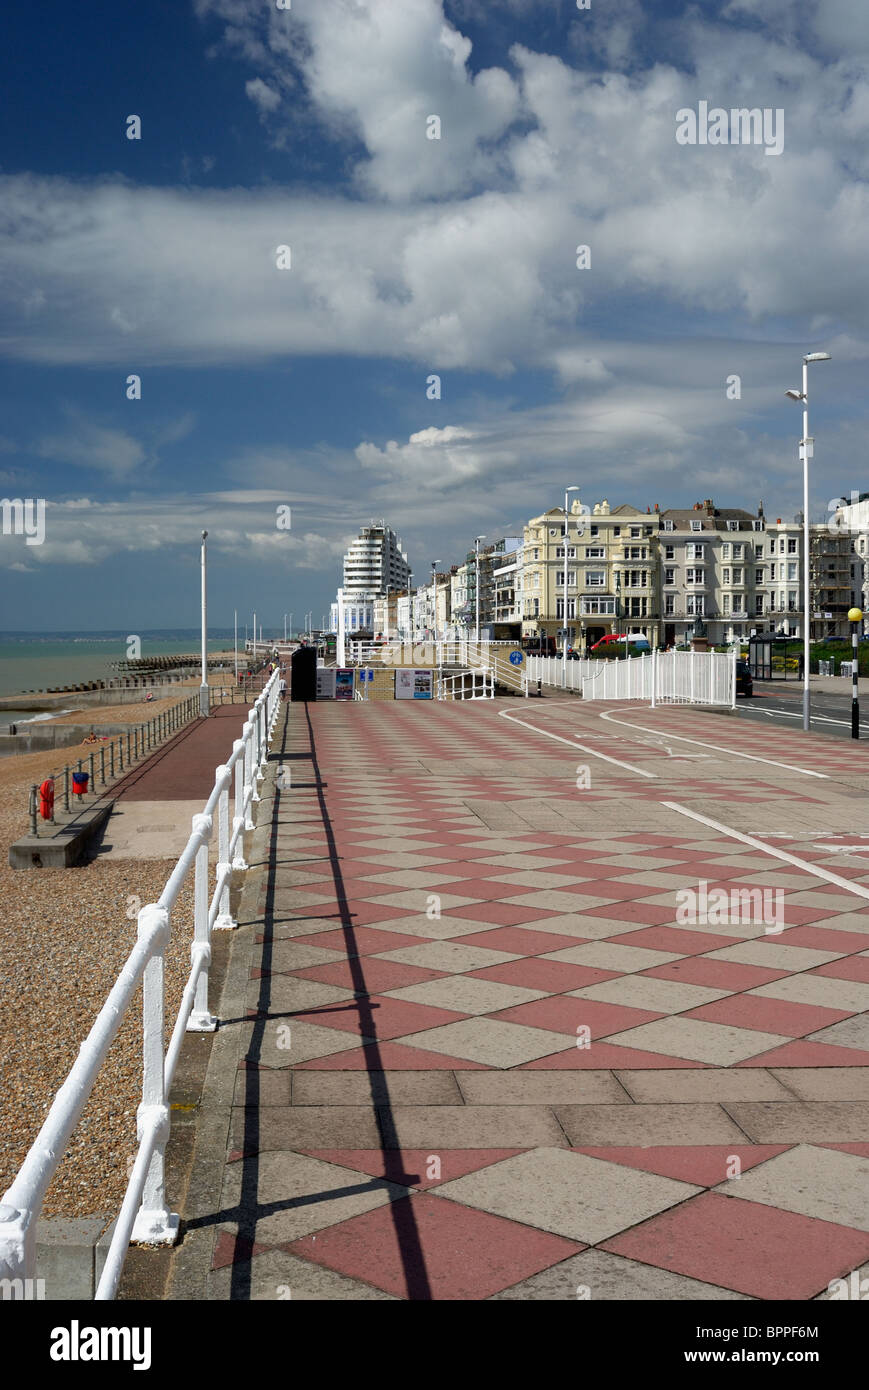 Hastings seafront, East sussex, UK Stock Photo